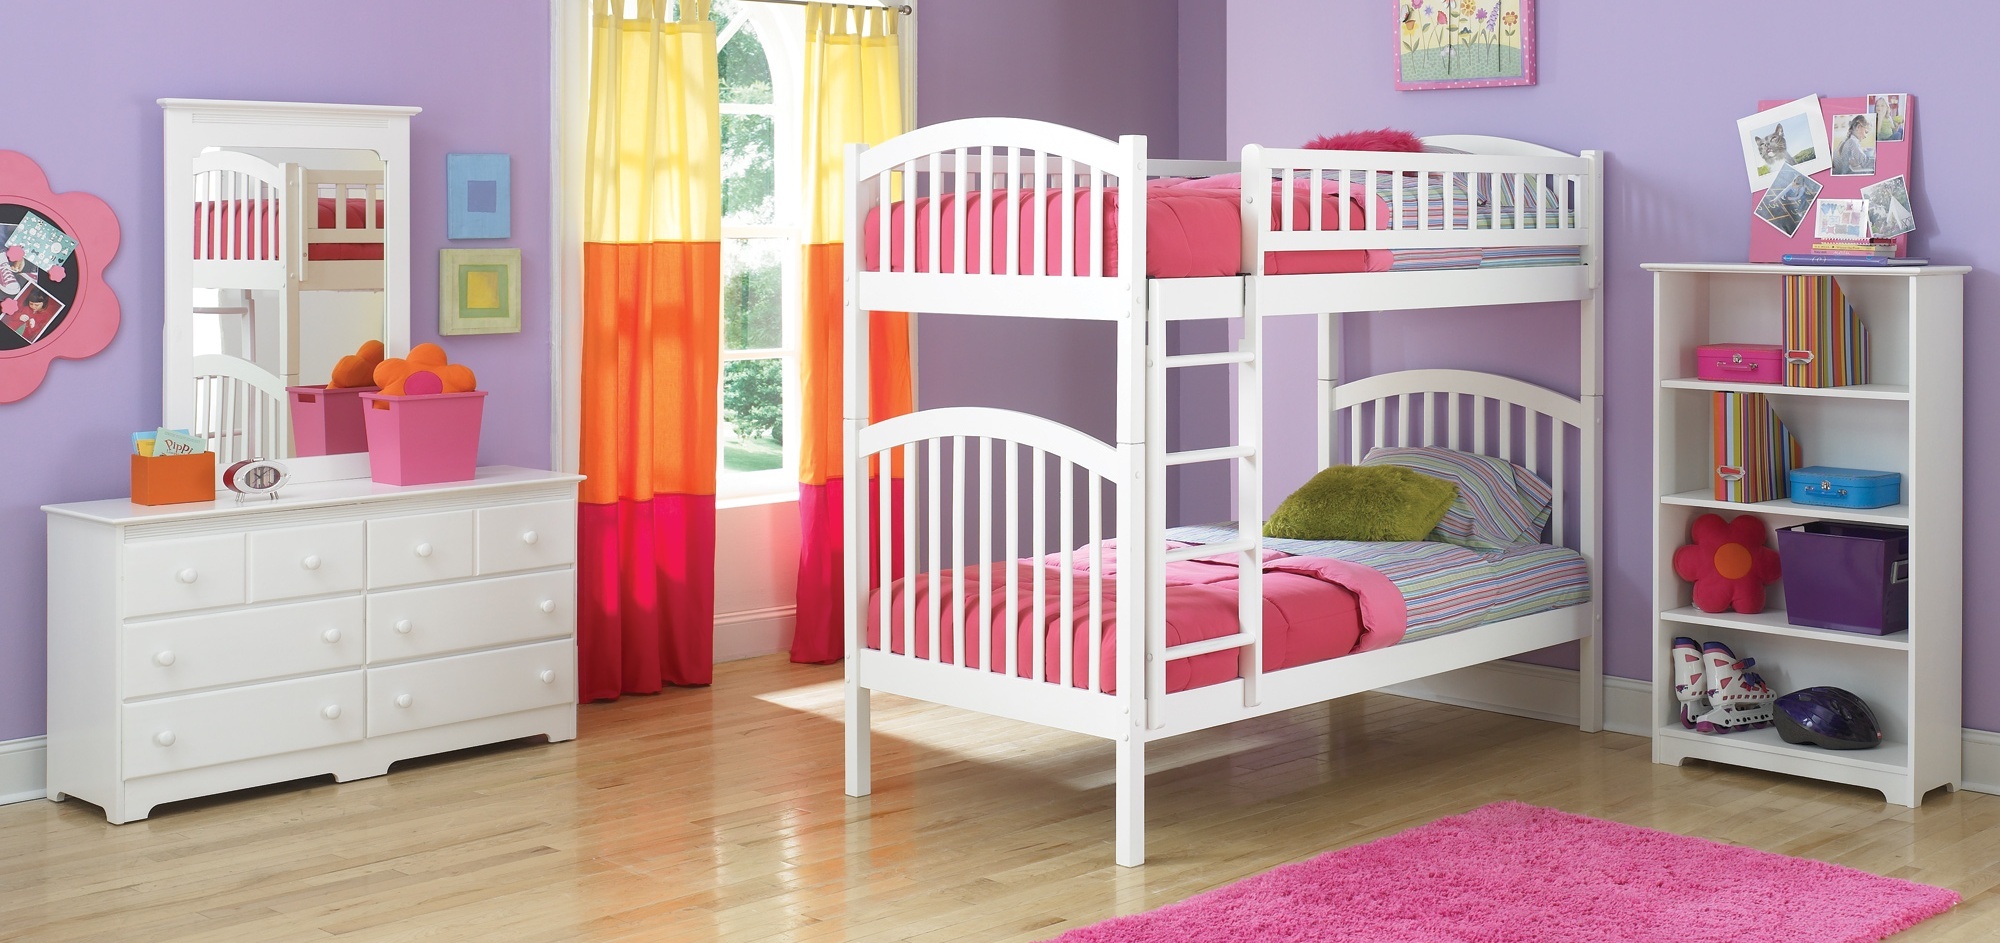 White Kids Color Stylish Pure White Kids Bedroom Sets Color Scheme Feats With Purple Wall Paint Ideas And Pink Fluffy Rug Best Bedroom Colors For Kids Bedroom Set